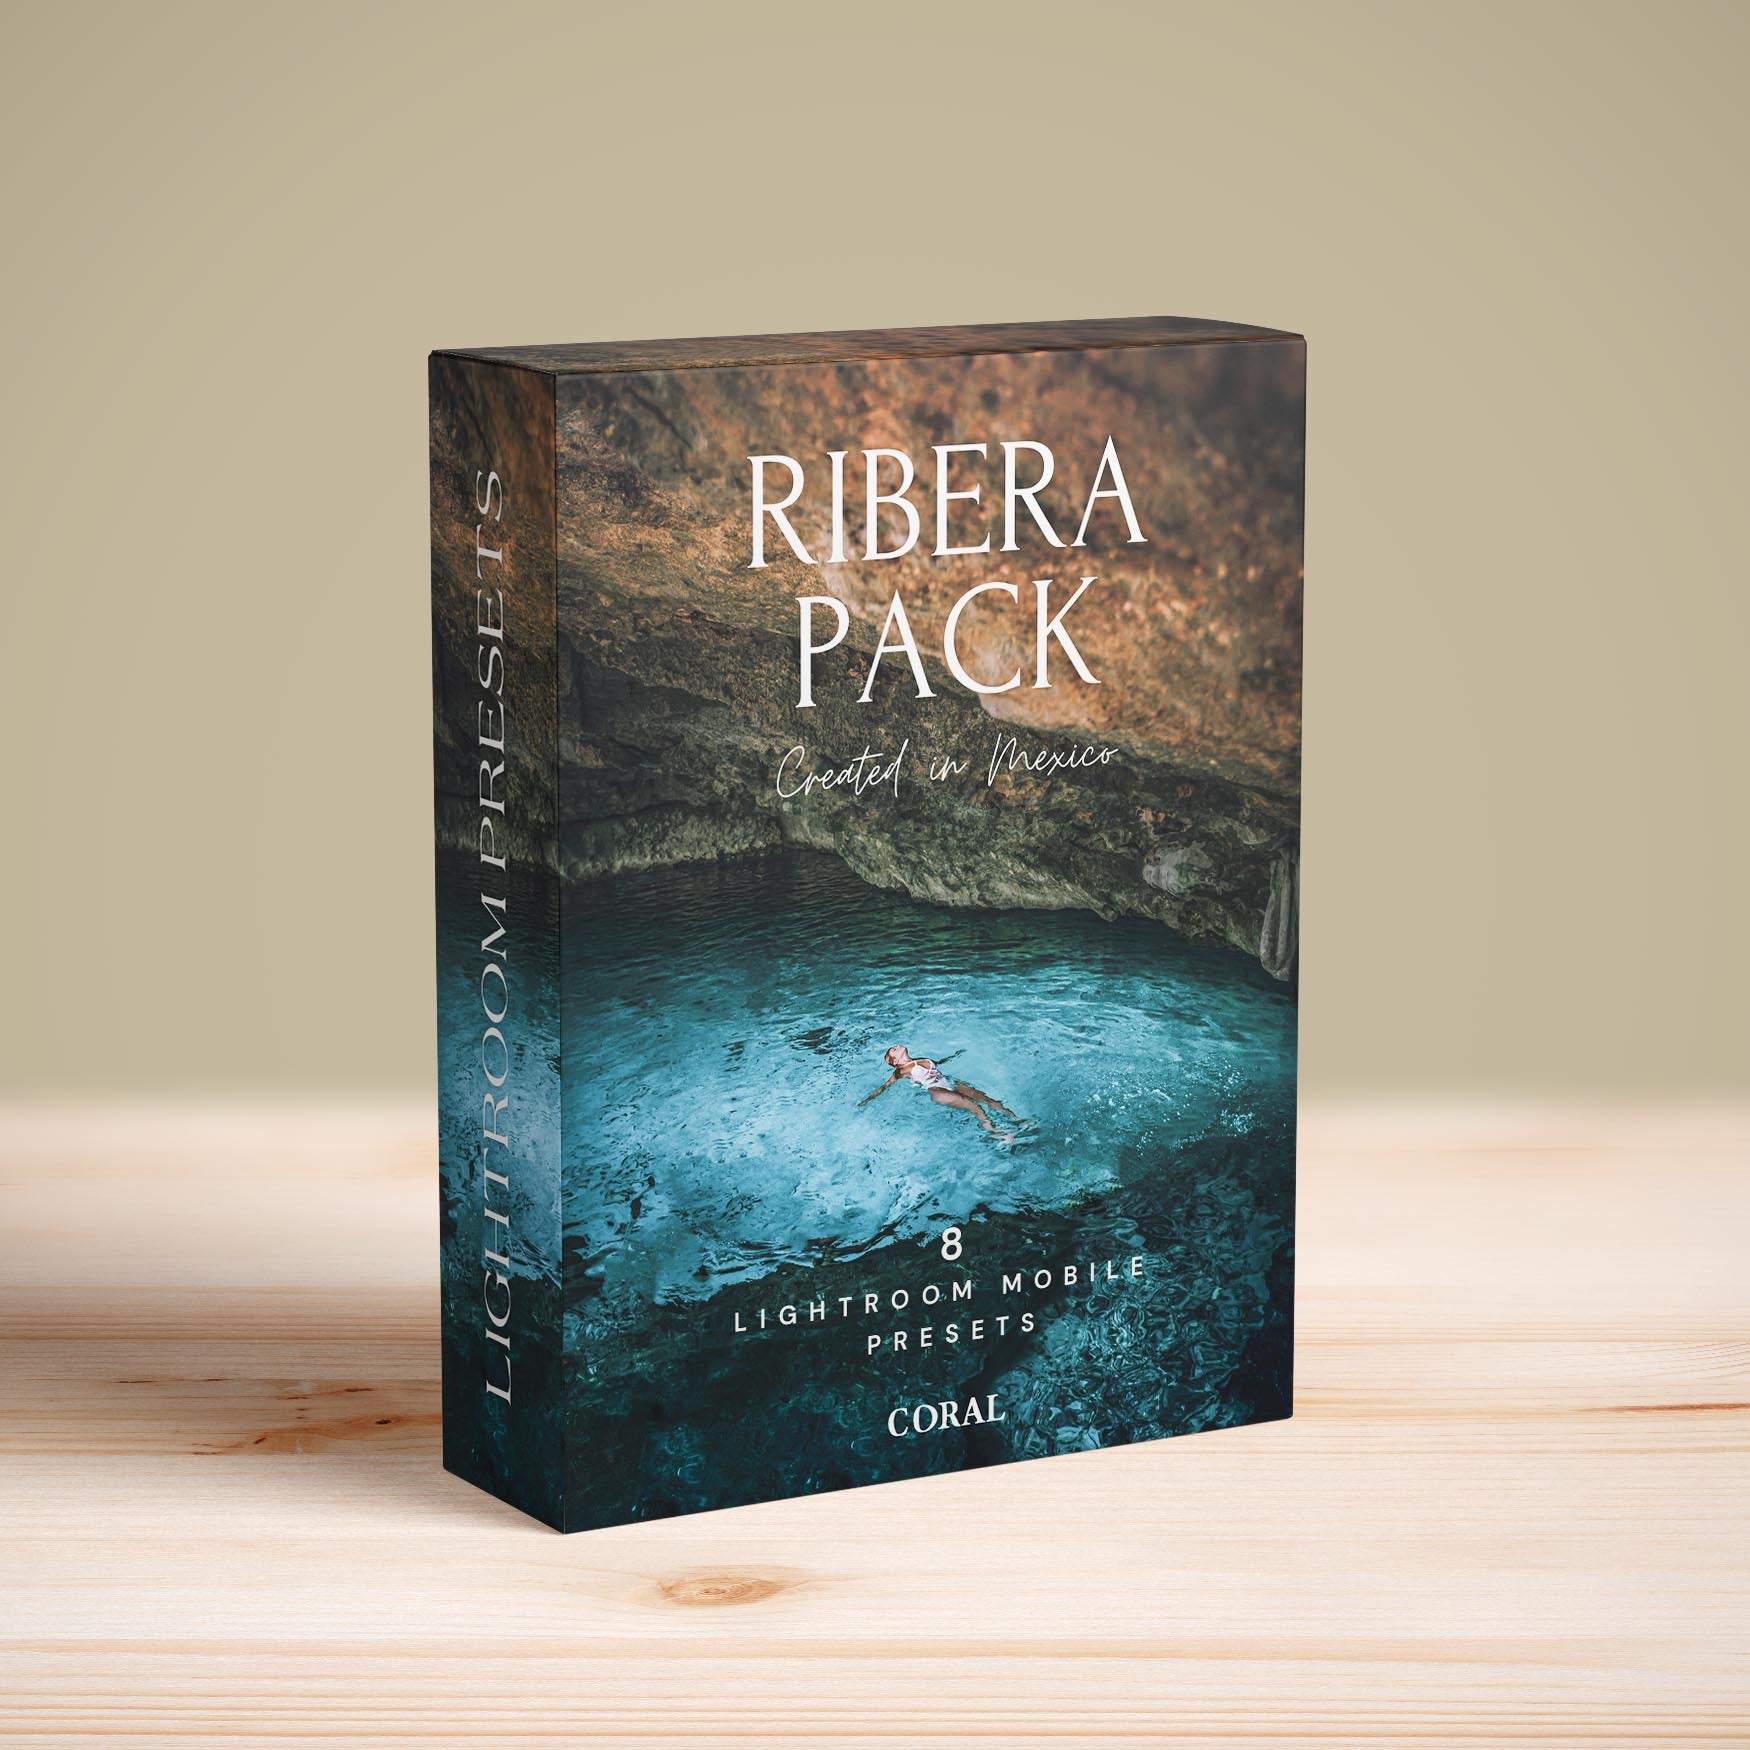 RIBERA PACK "Created in Mexico"